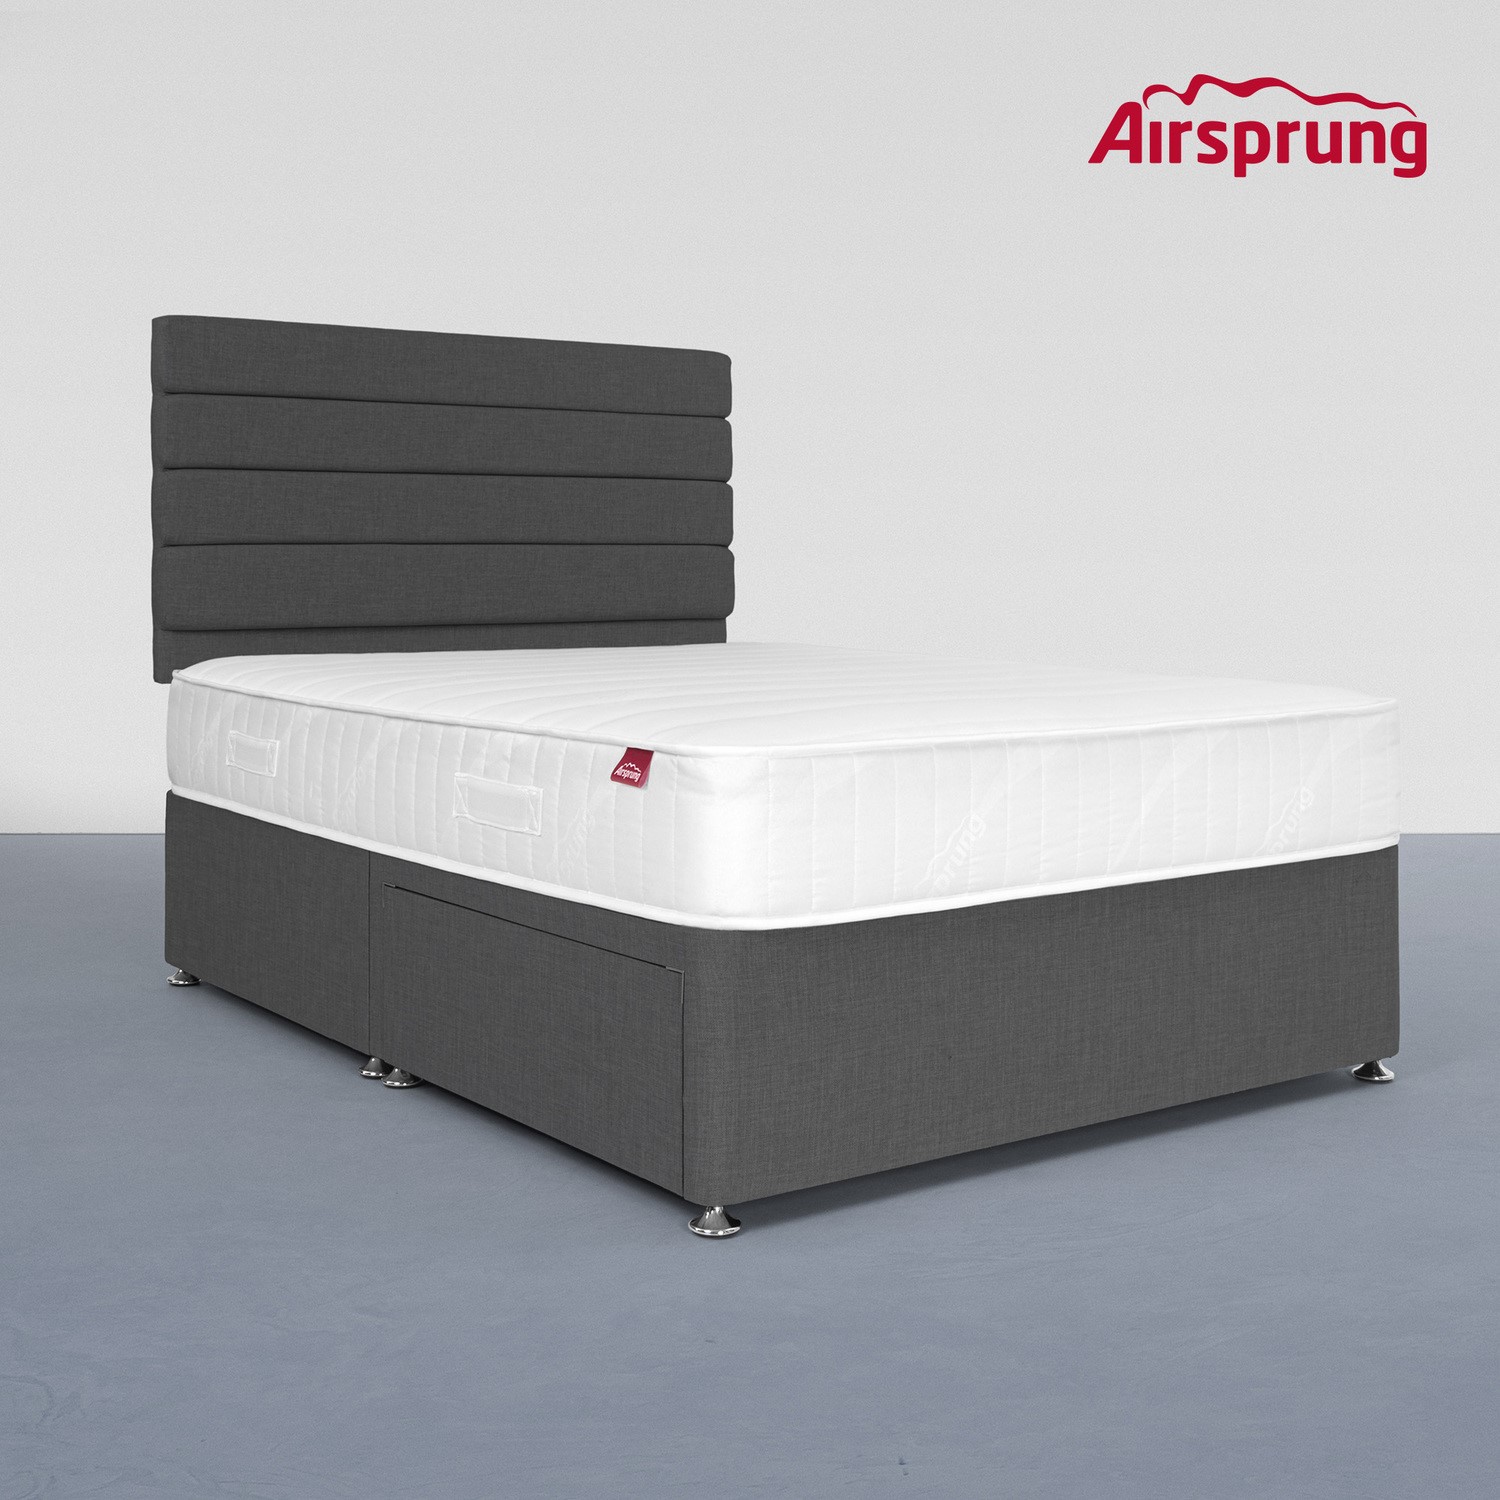 Photo of Airsprung small double 2 drawer divan bed with comfort mattress - charcoal